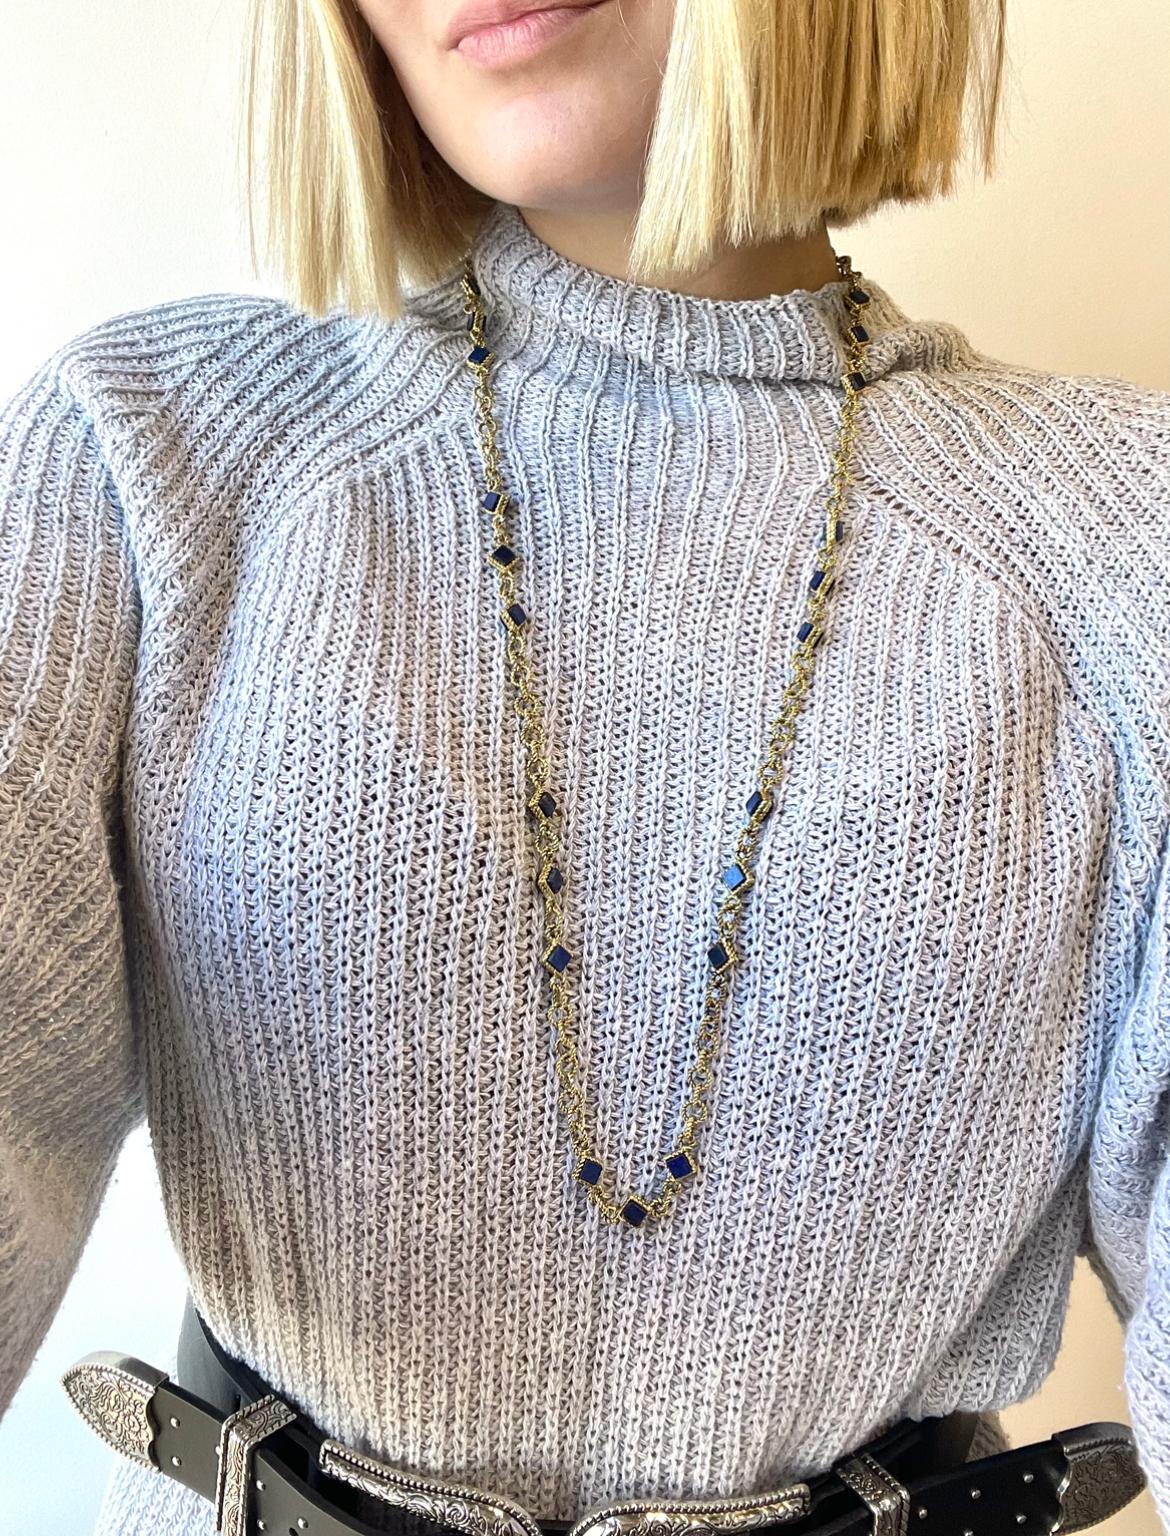 If you are looking for a unique gold chain necklace, this is the one! This Vintage Italian 18k Gold Necklace features dark blue lapis lazuli. Wear this necklace with denim for a complete look or with any other outfit for a unique accent. The